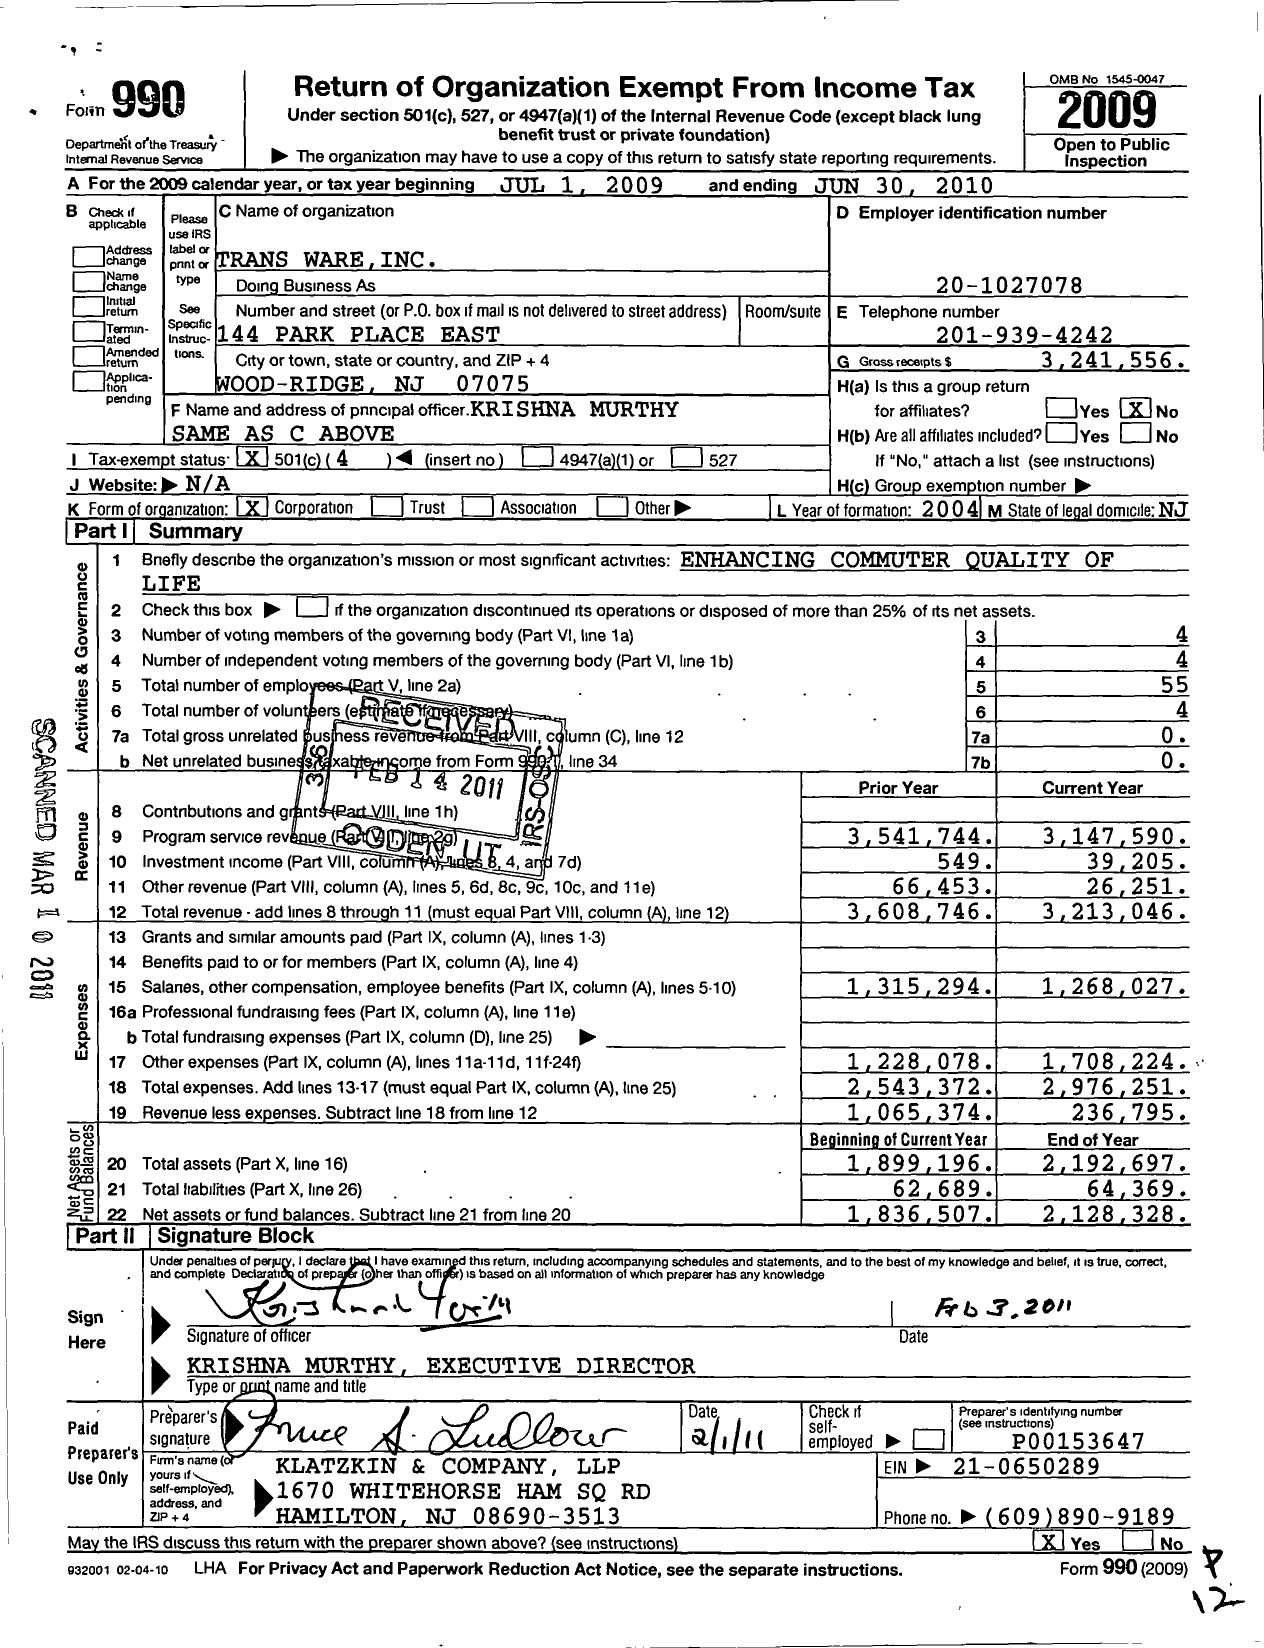 Image of first page of 2009 Form 990O for Trans Ware